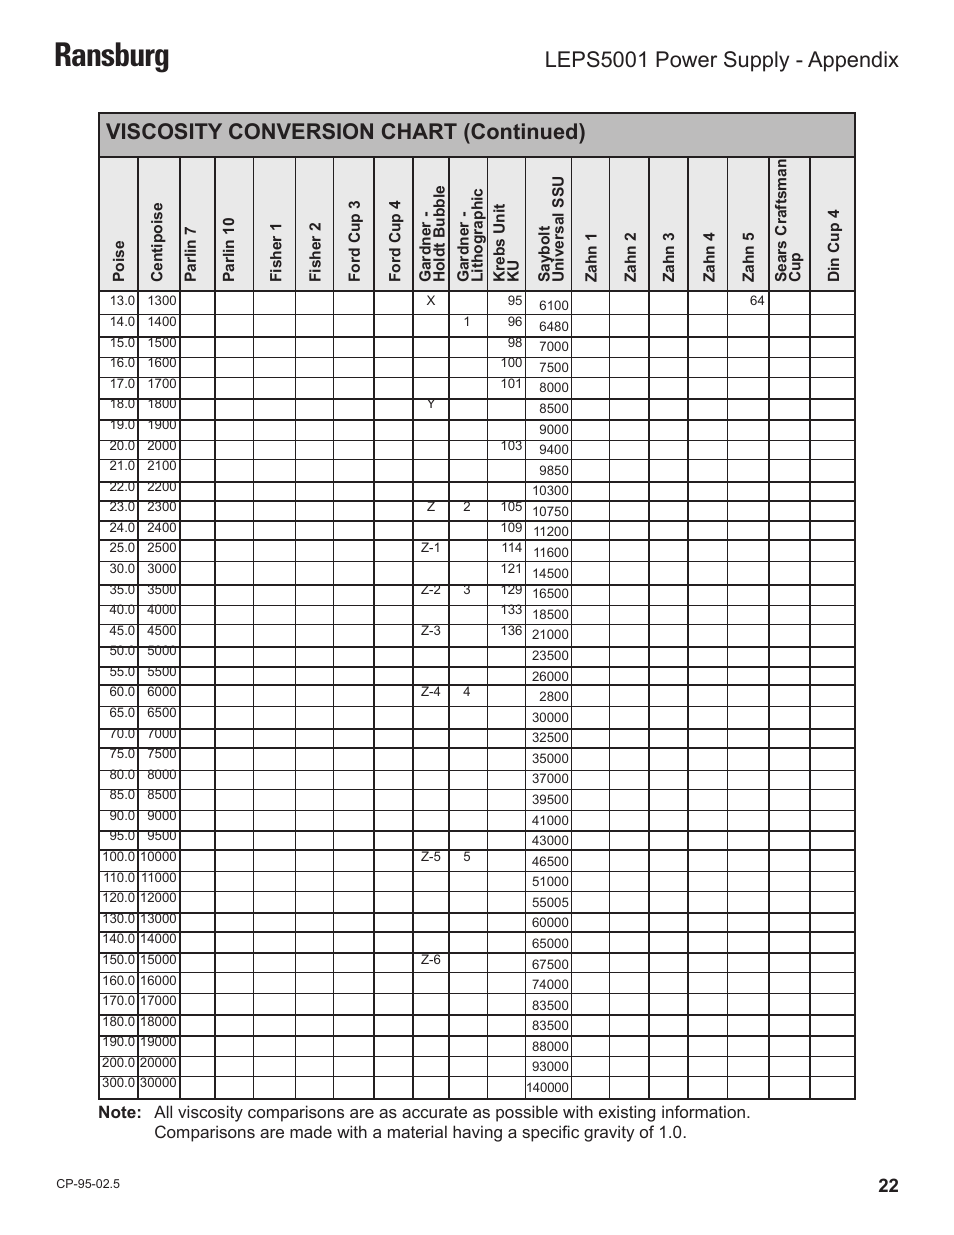 Ransburg, Viscosity conversion chart (continued), Leps5001 power supply -  appendix | Ransburg LEPS5001 Power Supply for LECU5003 User Manual | Page  25 / 28 | Original mode